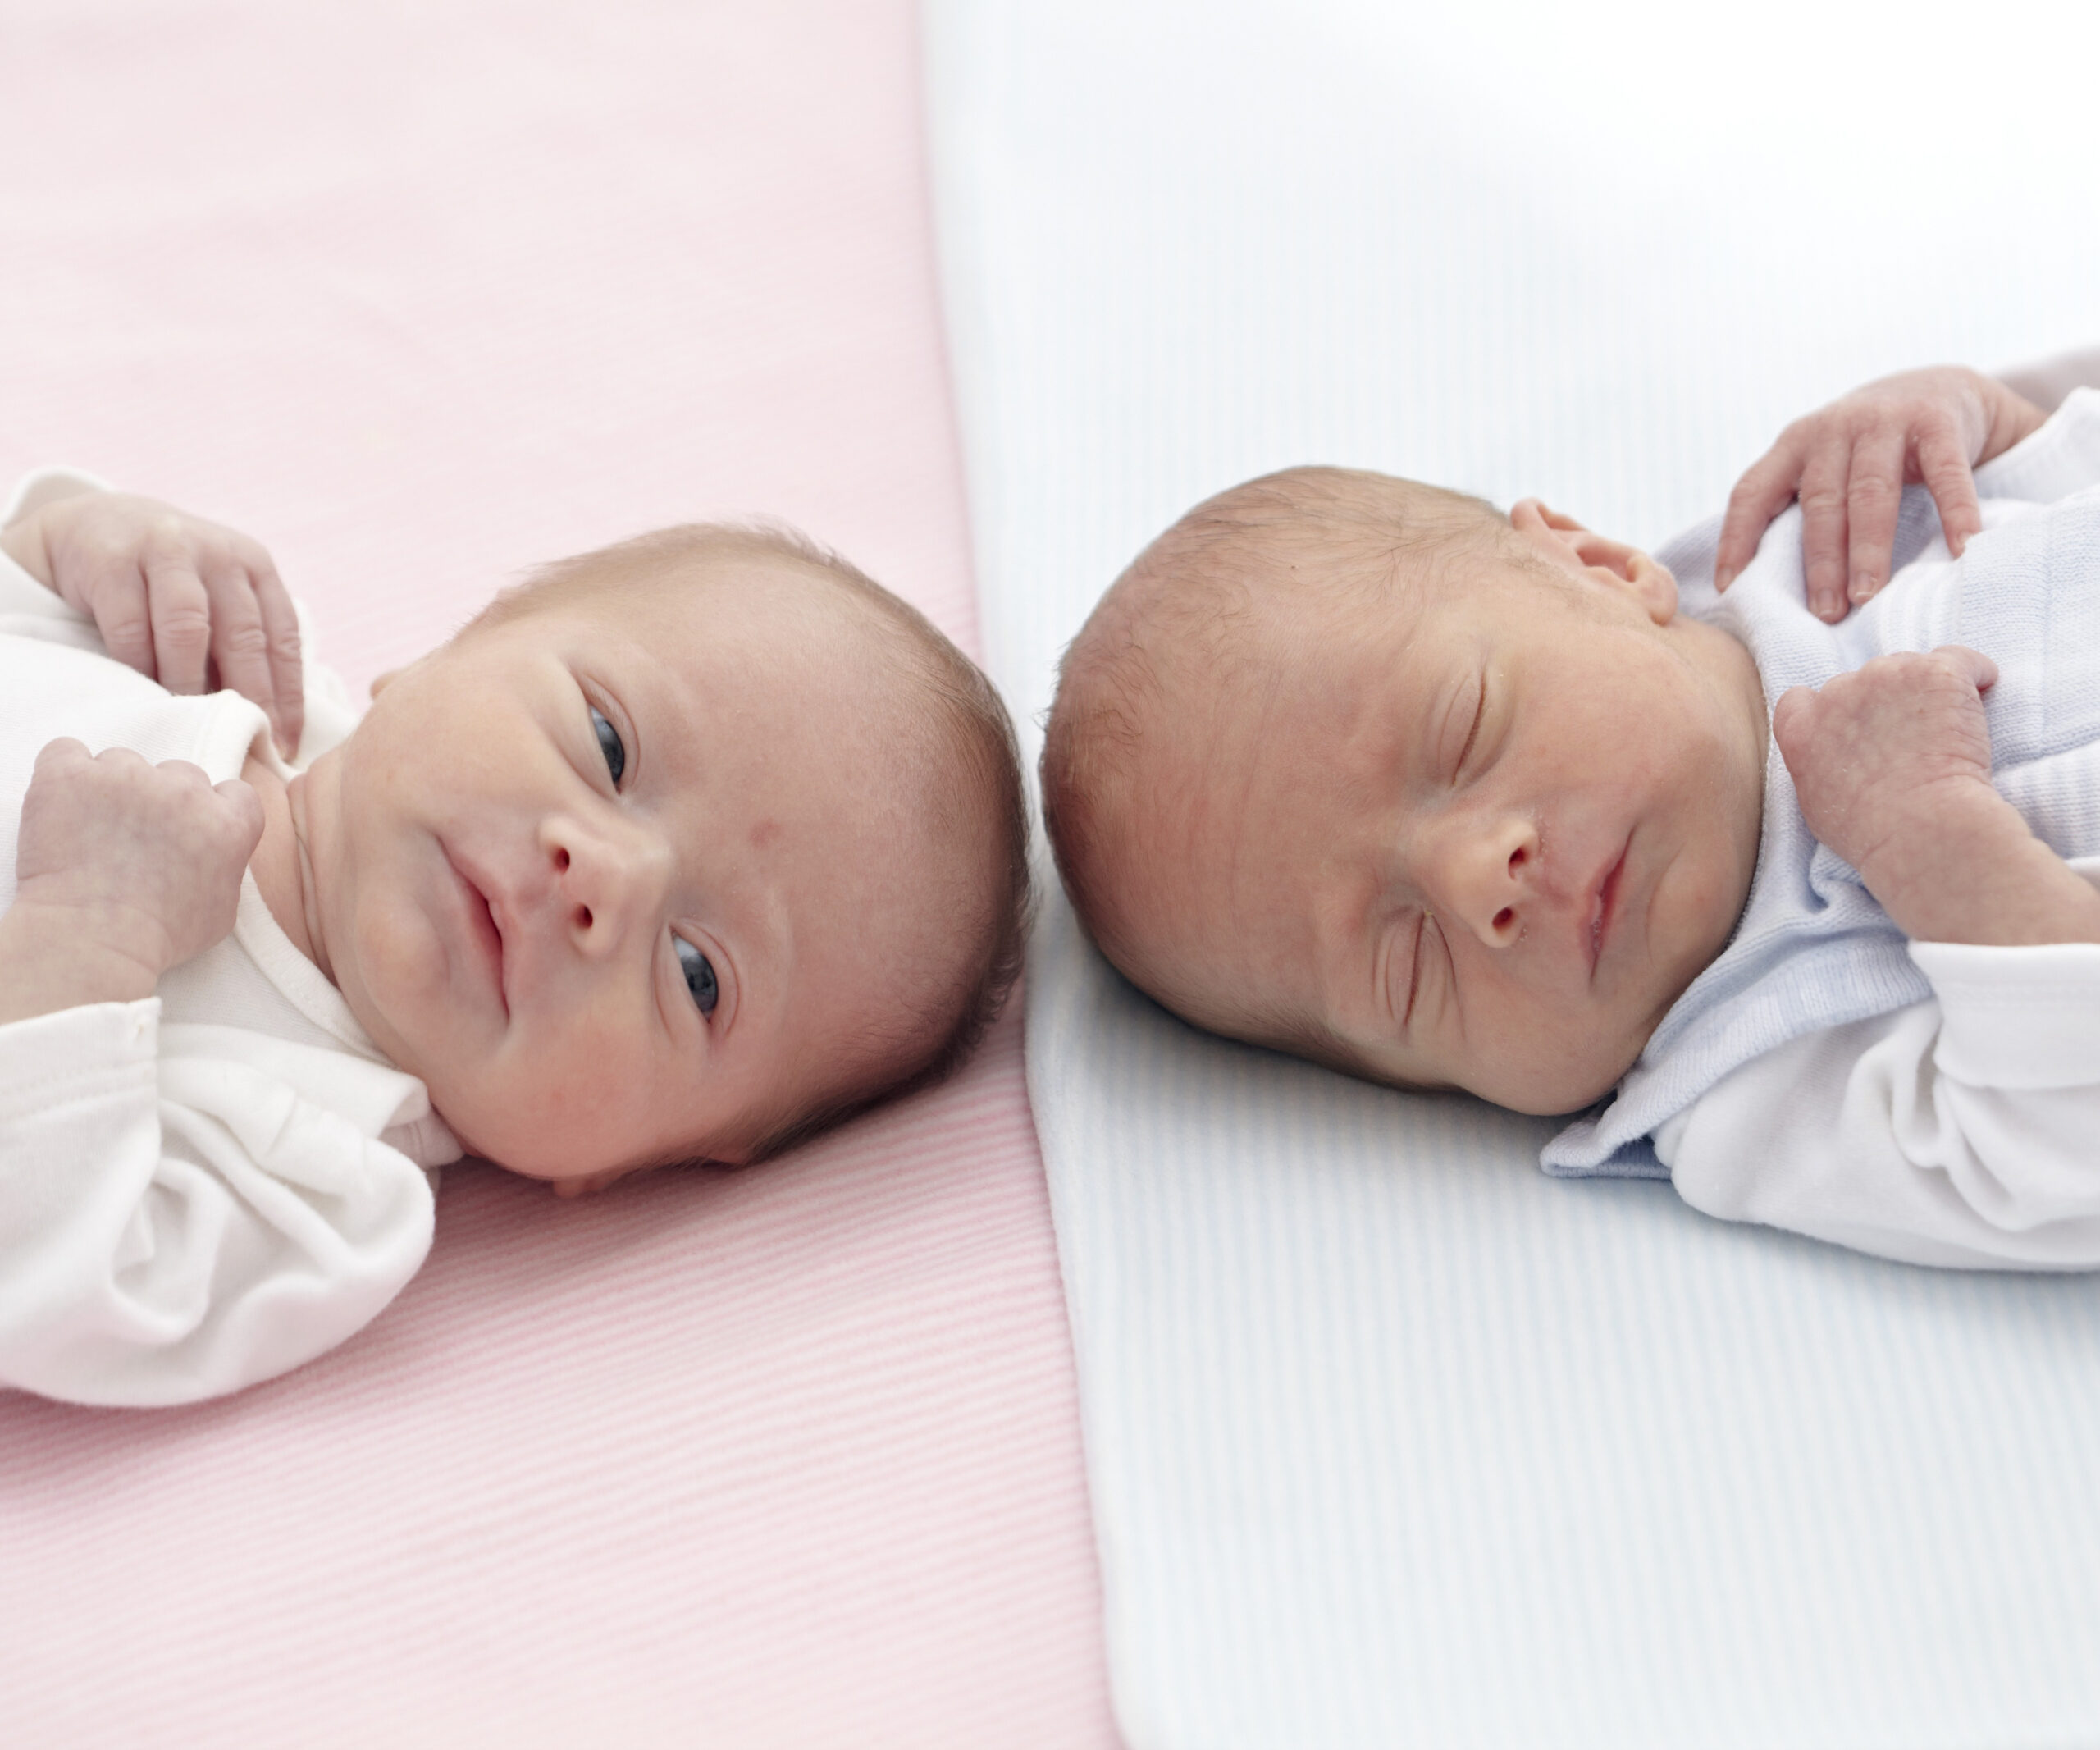 Twins born with different dads